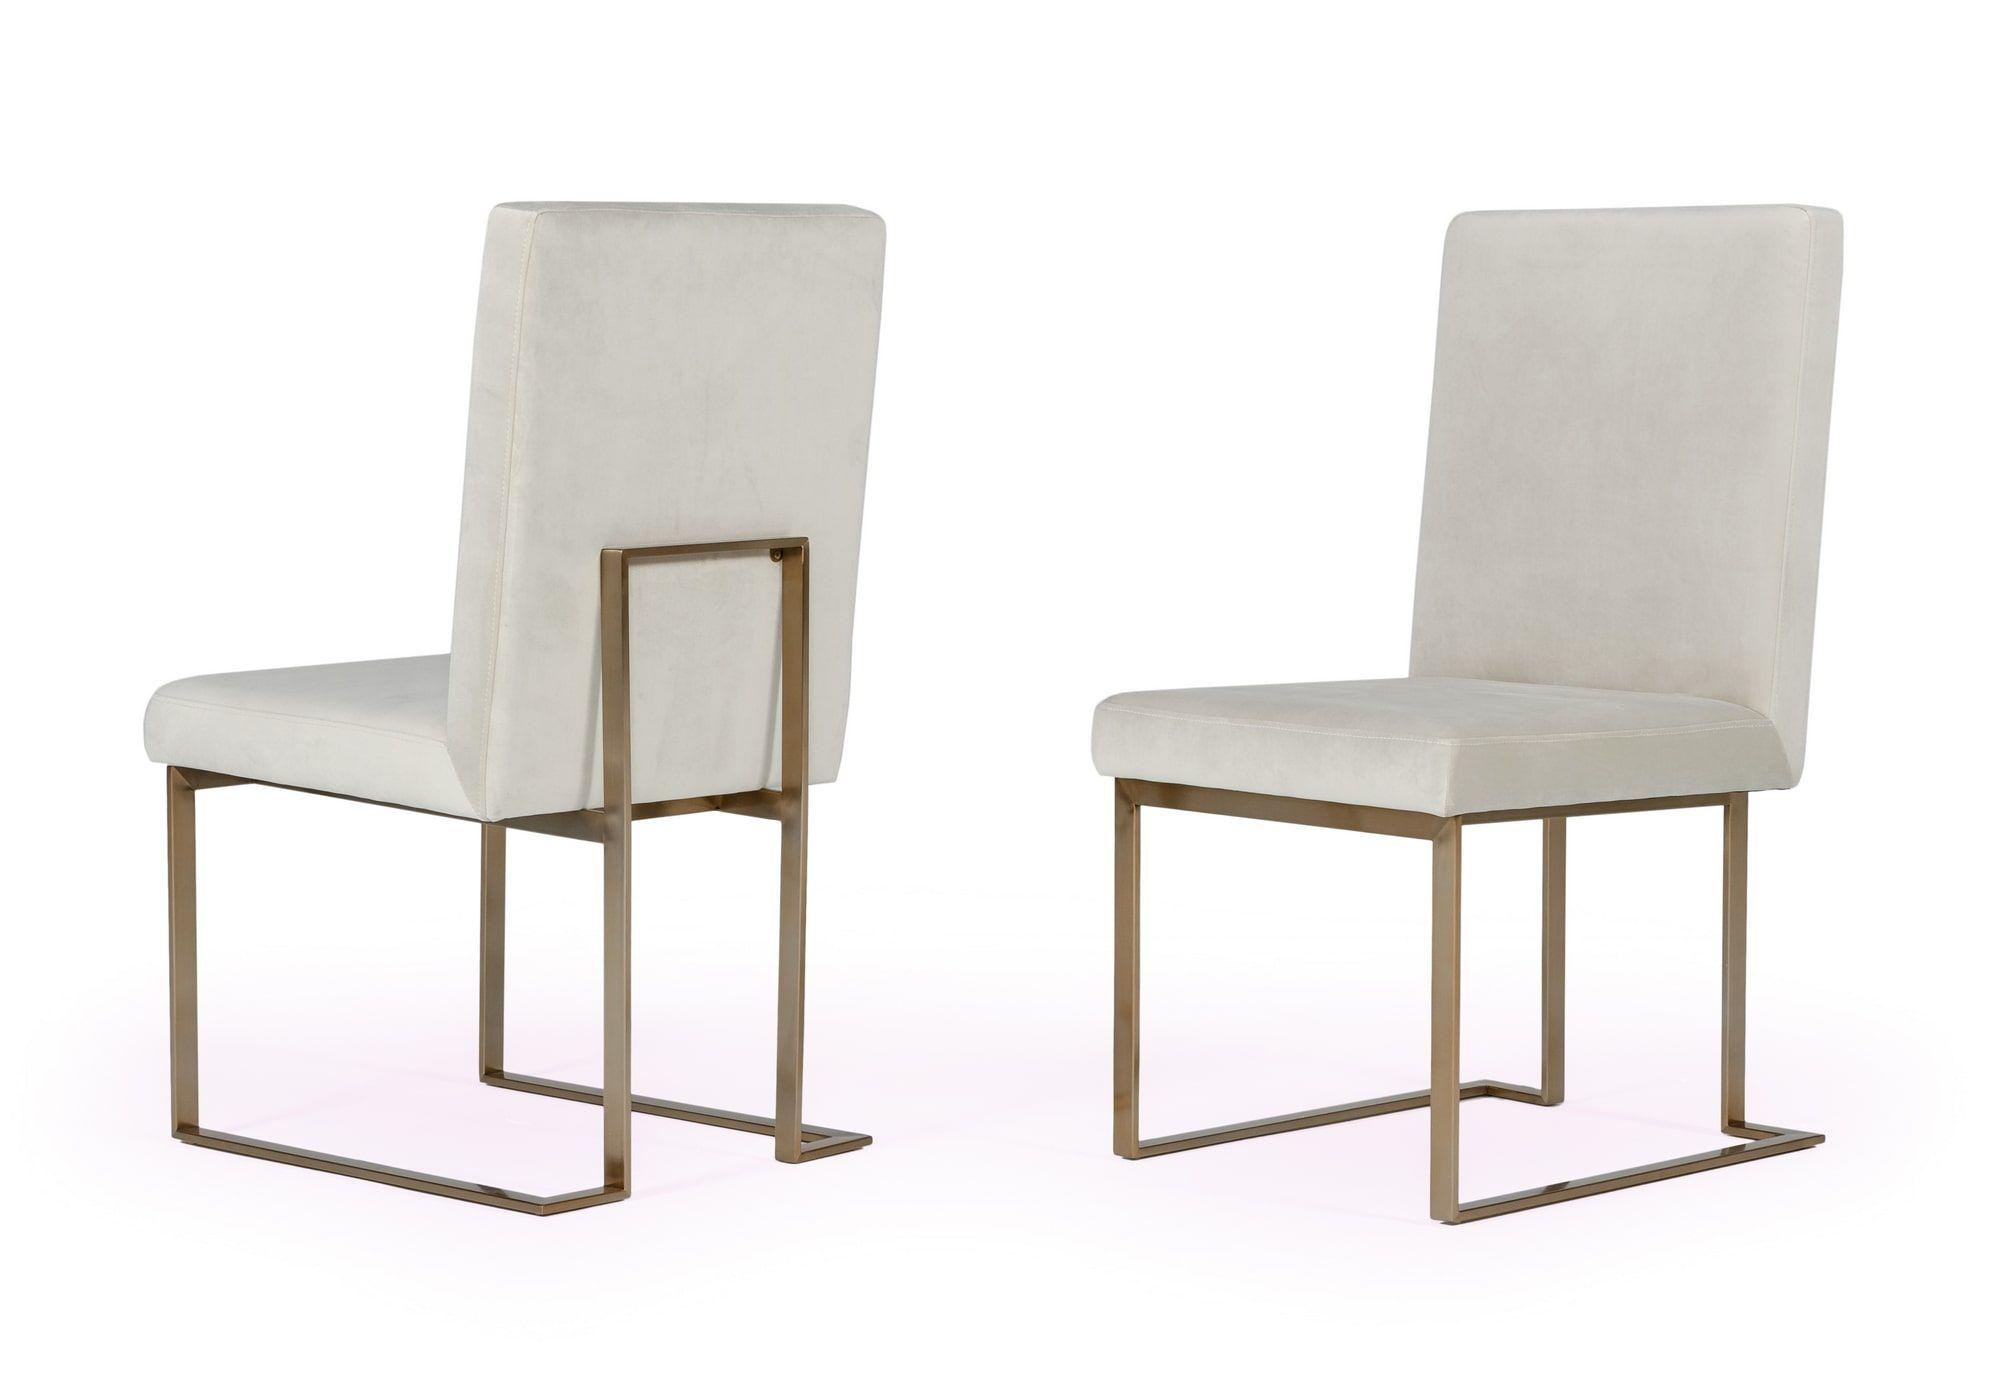 Contemporary, Modern Dining Chair Set Fowler VGVCB8866-GRY-2pcs in White, Gold Velvet